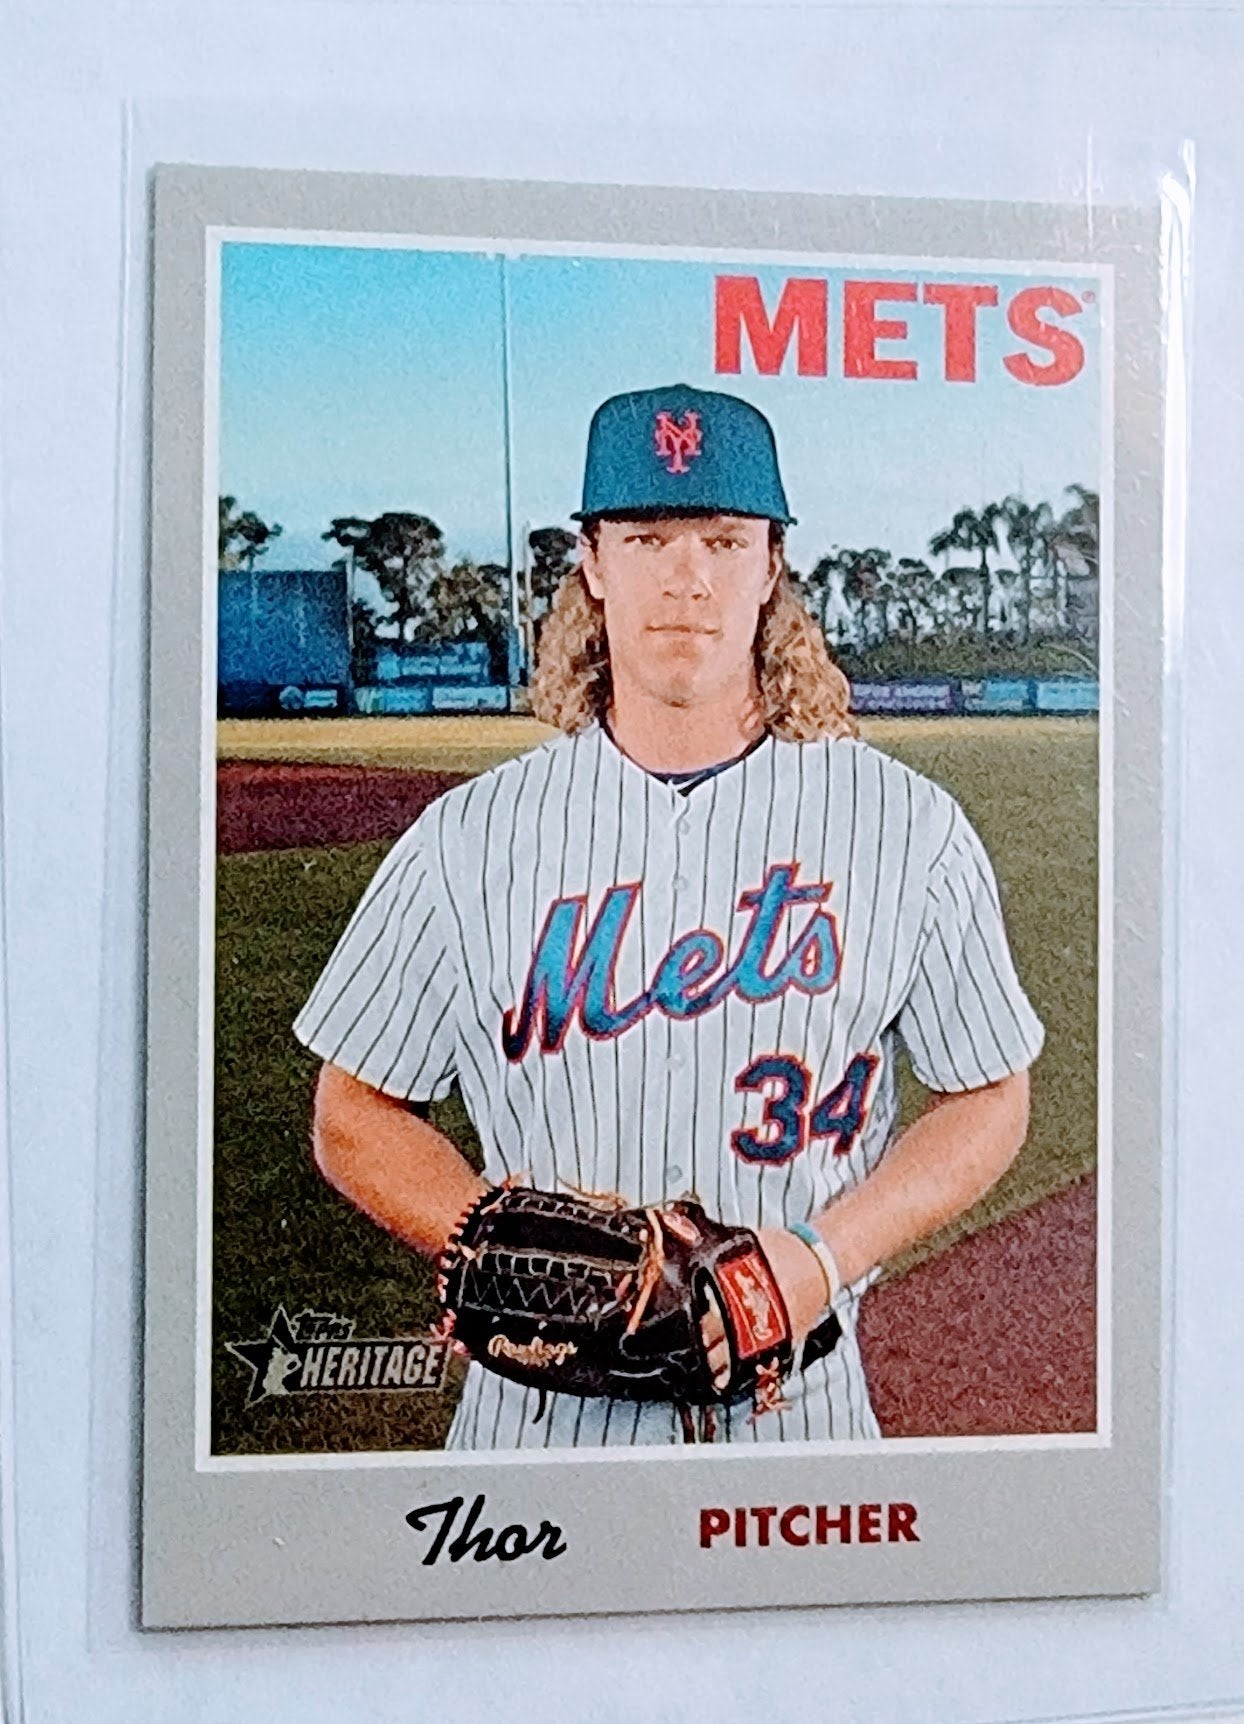 2019 Topps Heritage Thor Noah Syndergaard Nickname Variation SSP Insert Baseball Card TPTV simple Xclusive Collectibles   